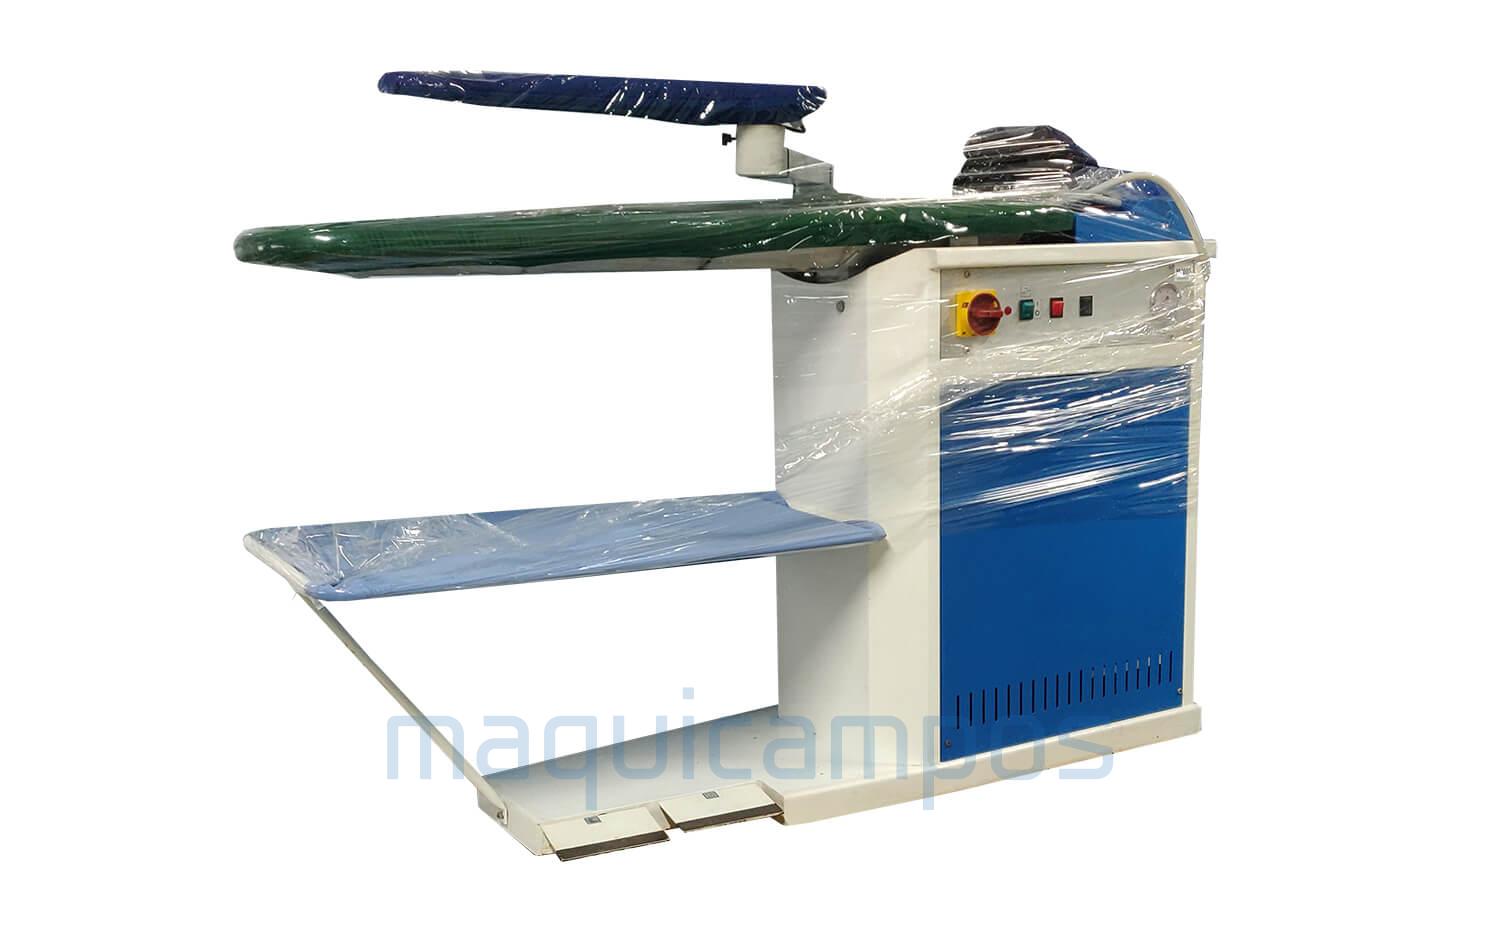 Fimas 173.05 Ironing Table with Suction and Blowing Fan